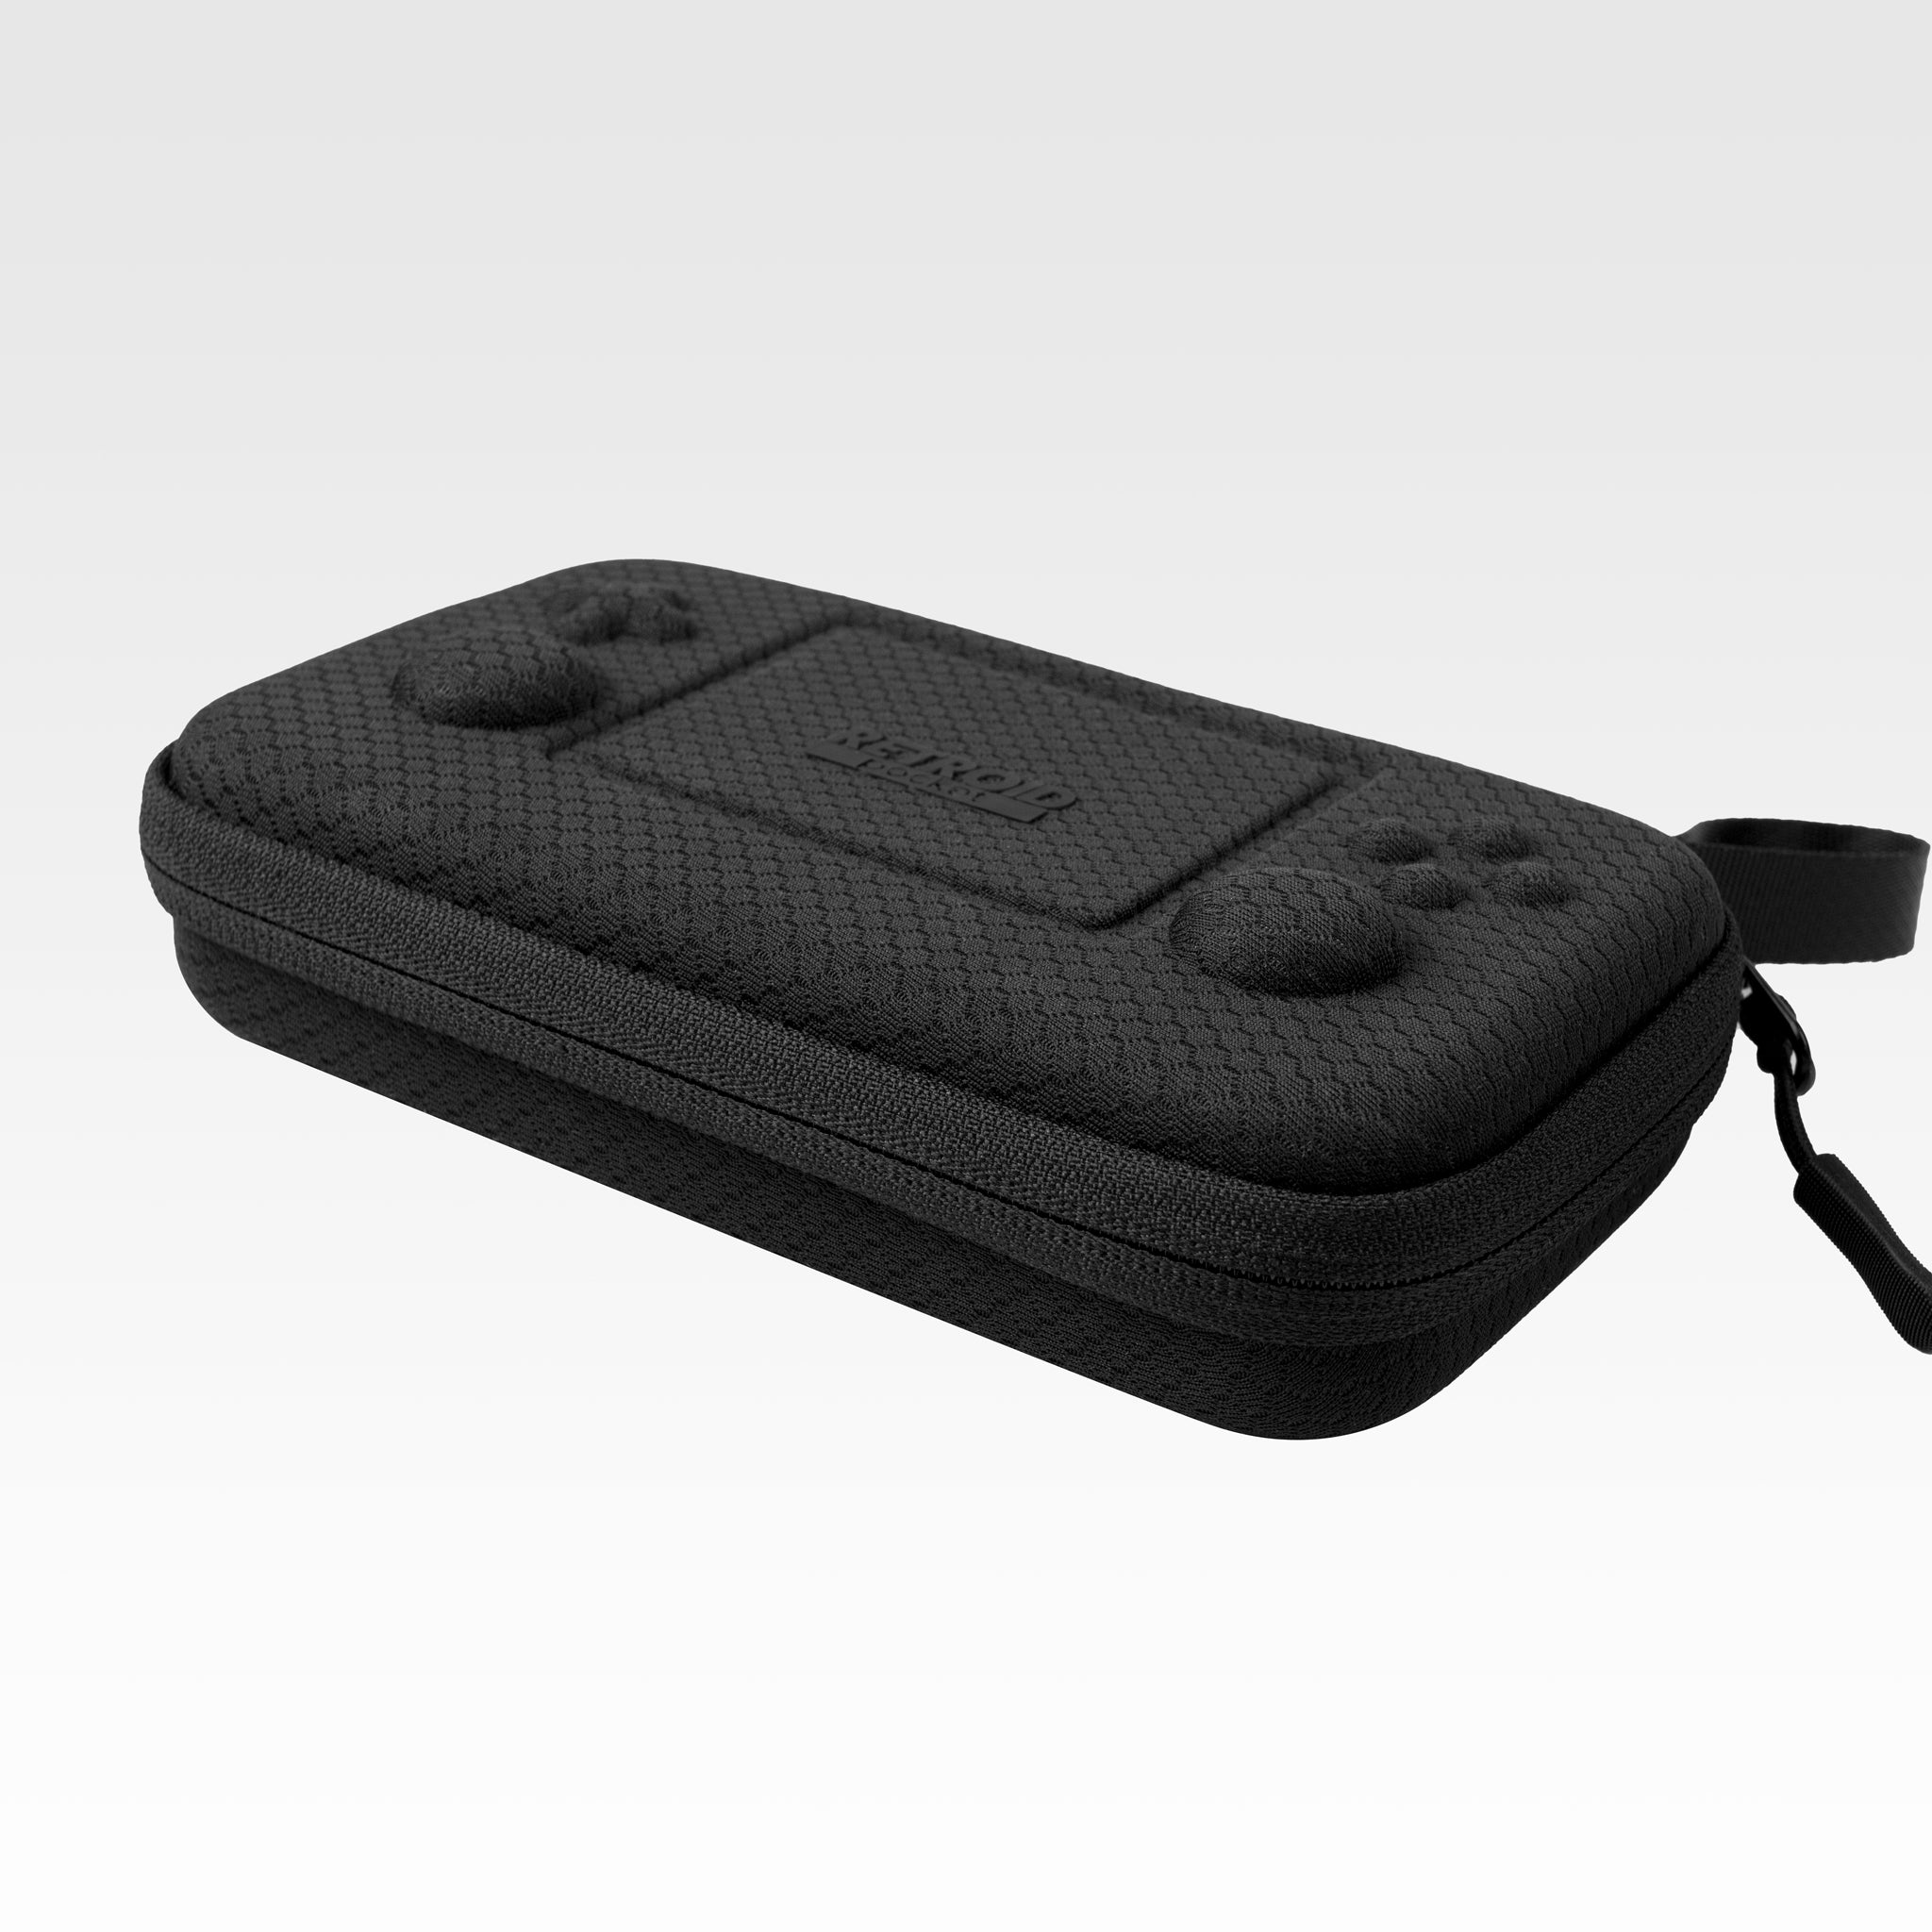 Retroid Pocket 4/4Pro Carrying Case